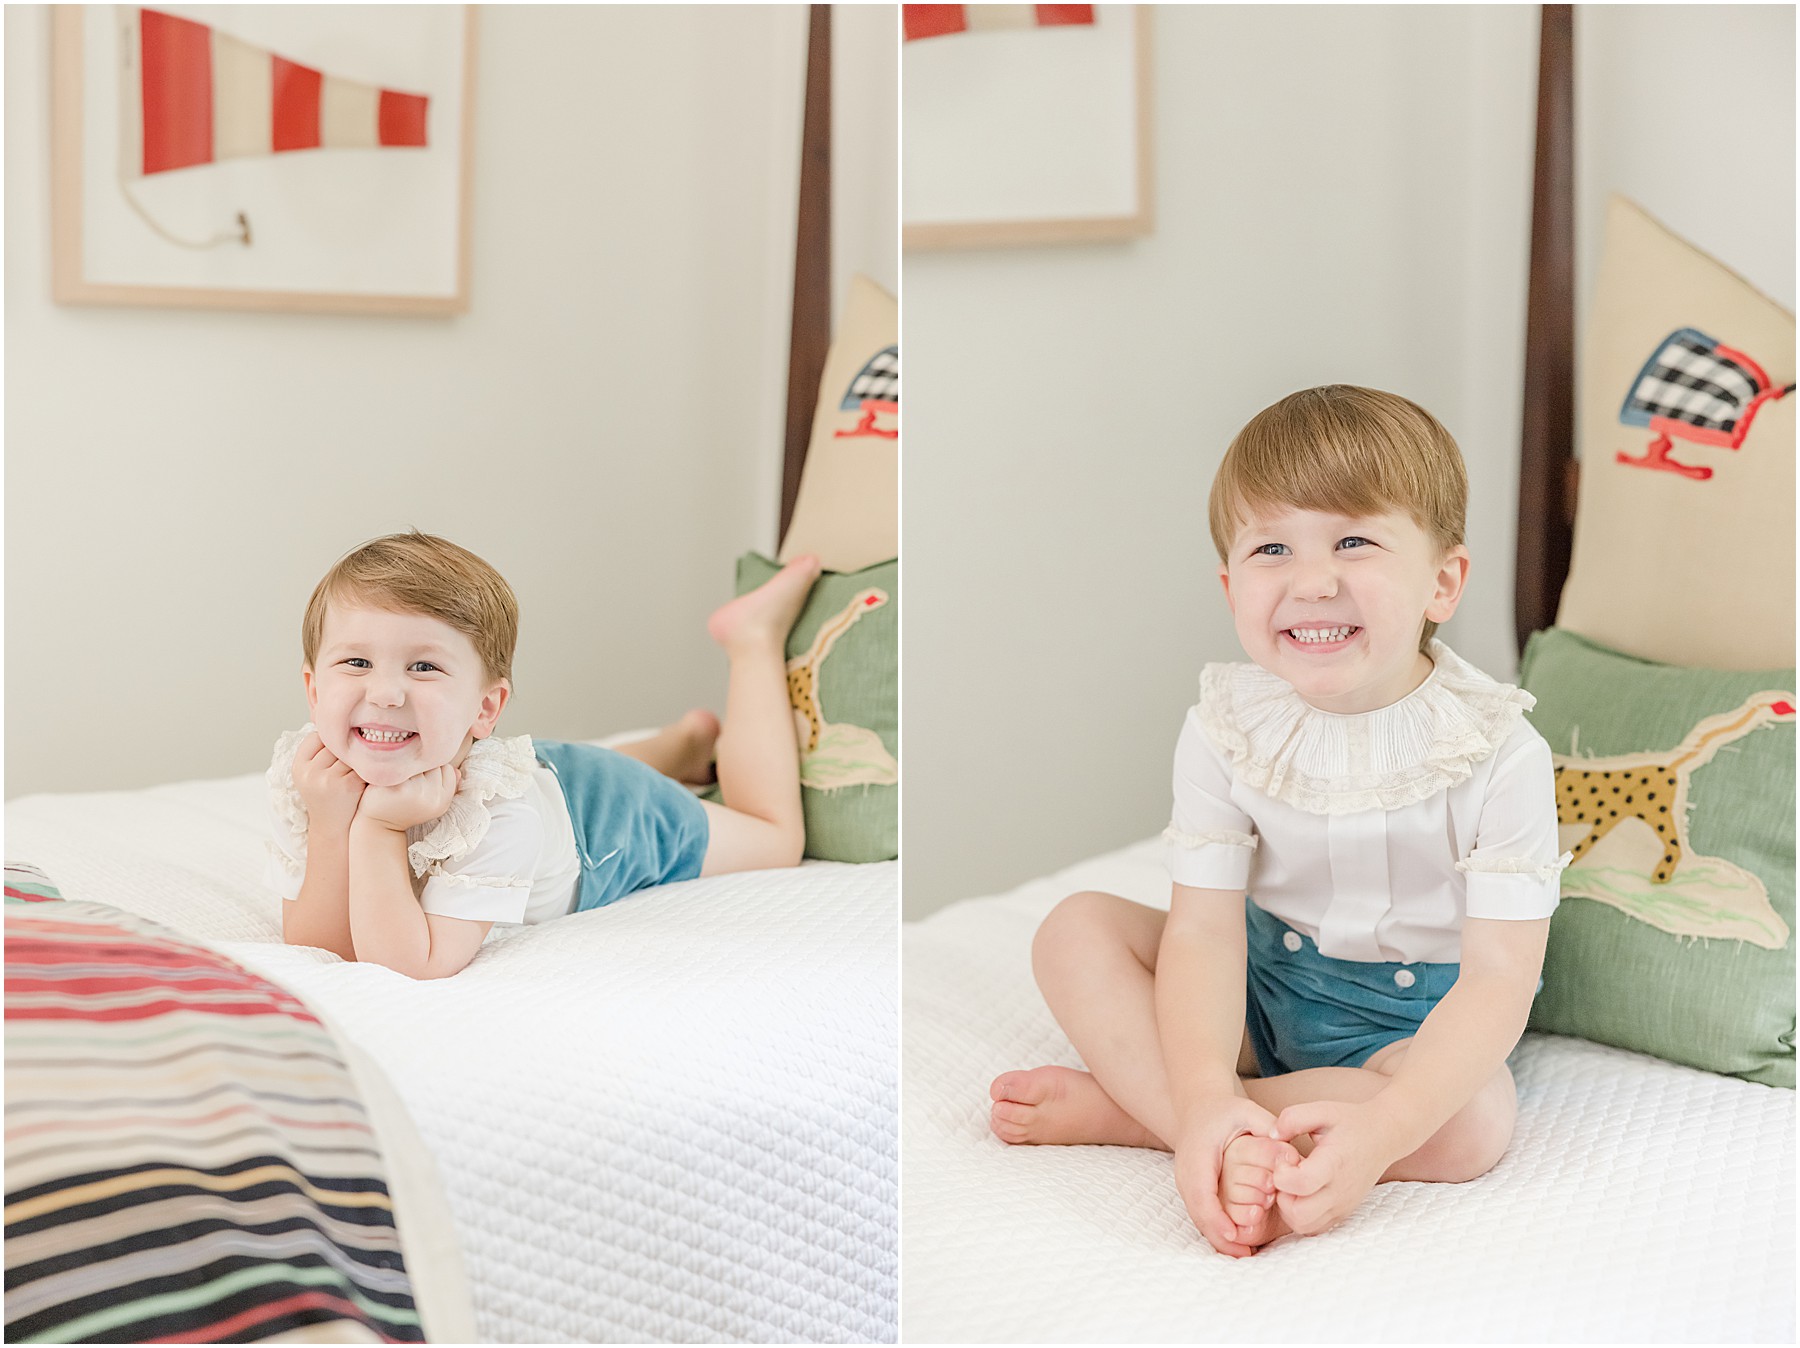 Portraits of a toddler sitting on his big boy bed